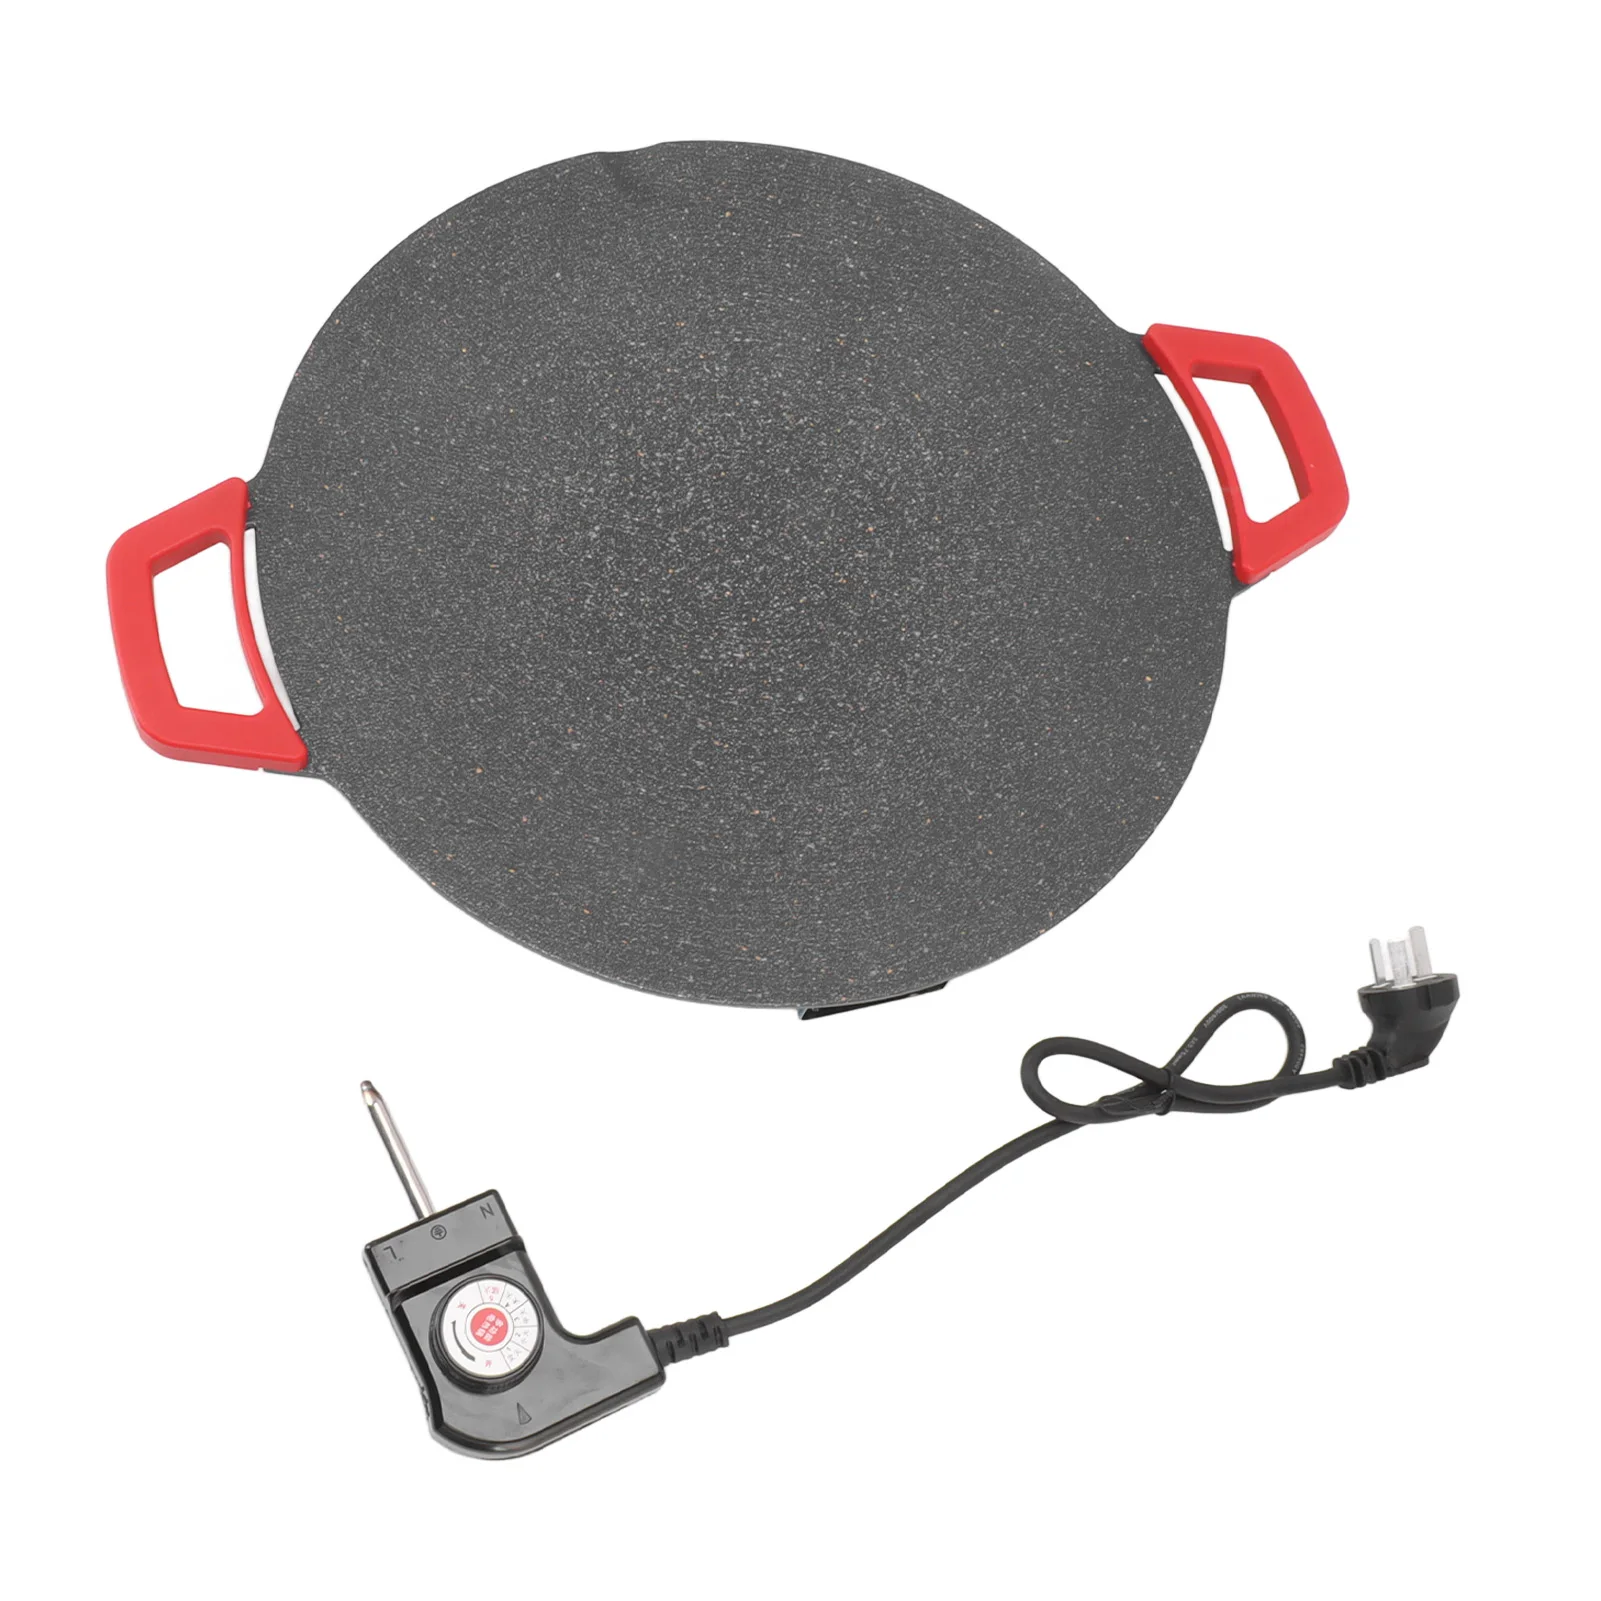 https://ae01.alicdn.com/kf/Sc9dcc2323dd647a99c66f842684b3affu/Korean-Grill-Pan-Electric-Round-Comal-BBQ-Griddle-Plate-with-Non-Stick-Coating-AU-Plug-220V.jpg